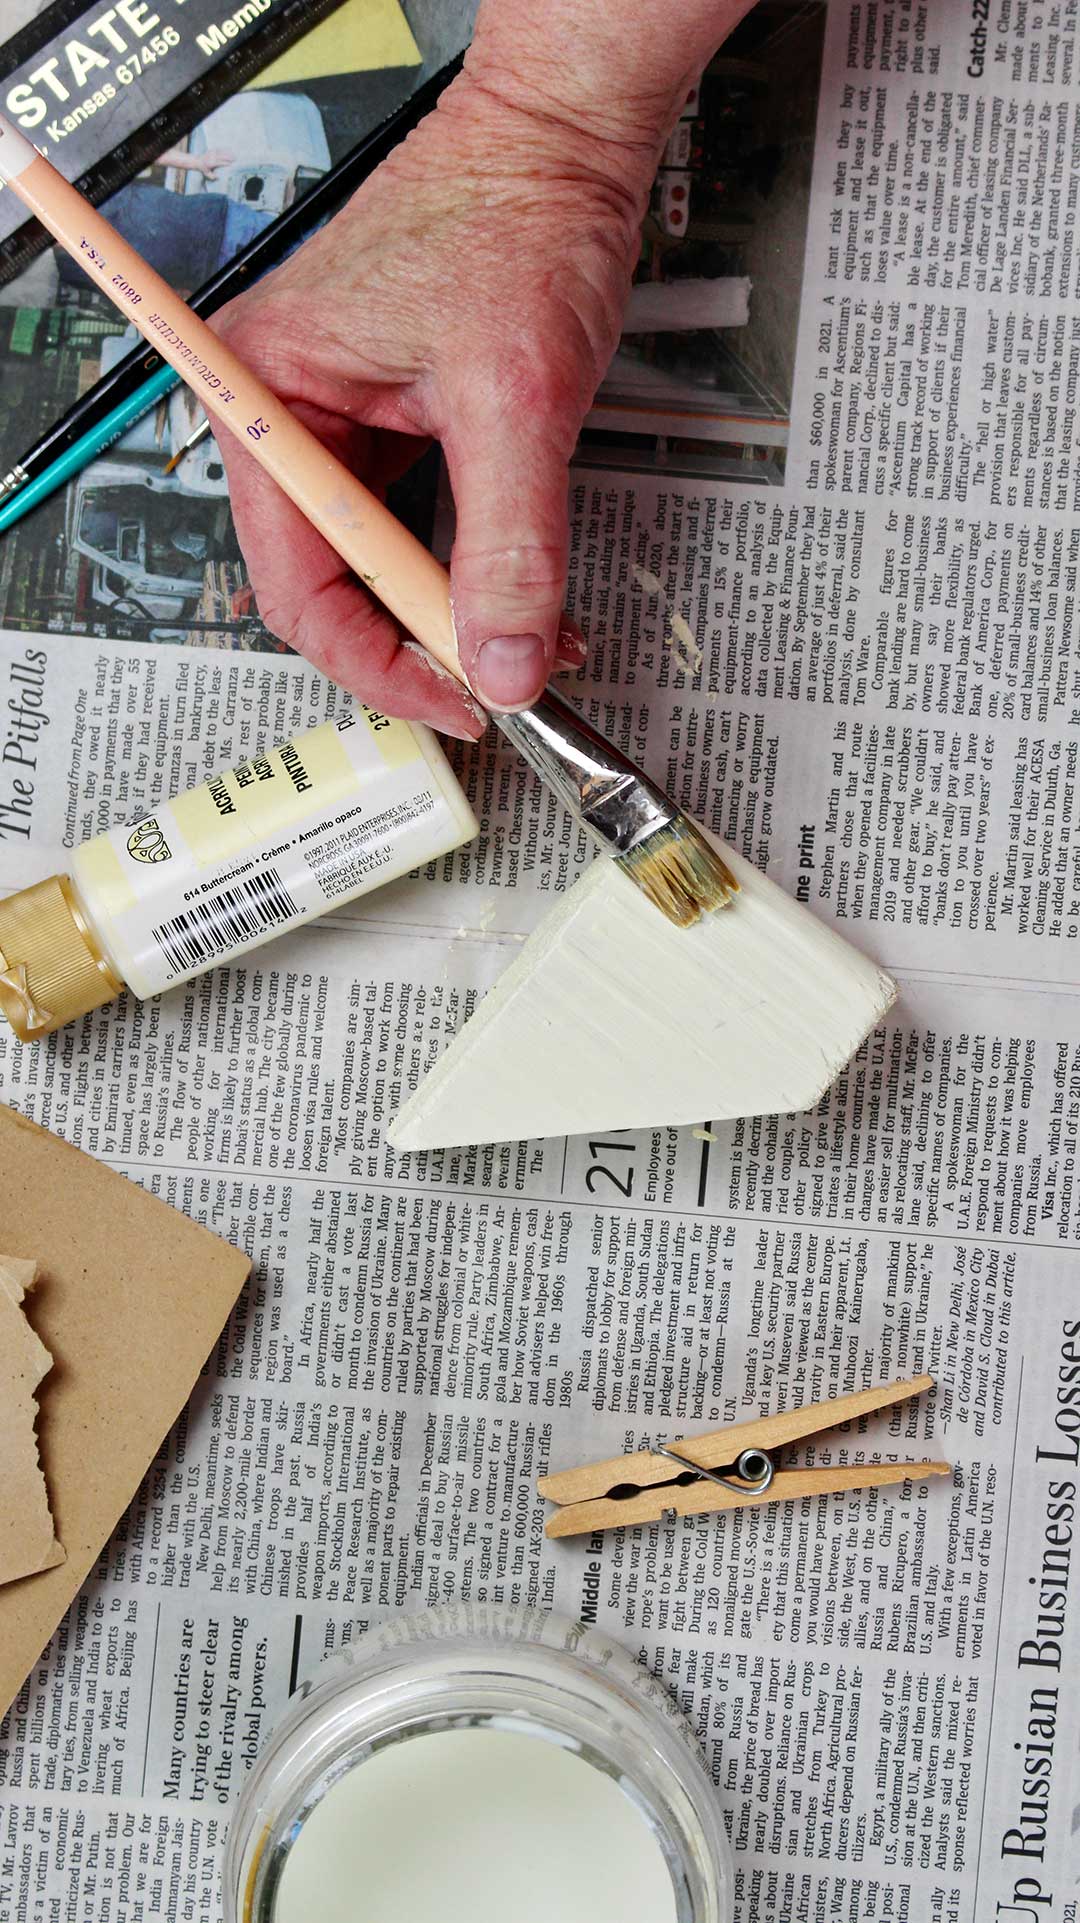 Hand paints a wooden block white while resting on newsprint with other supplies around.